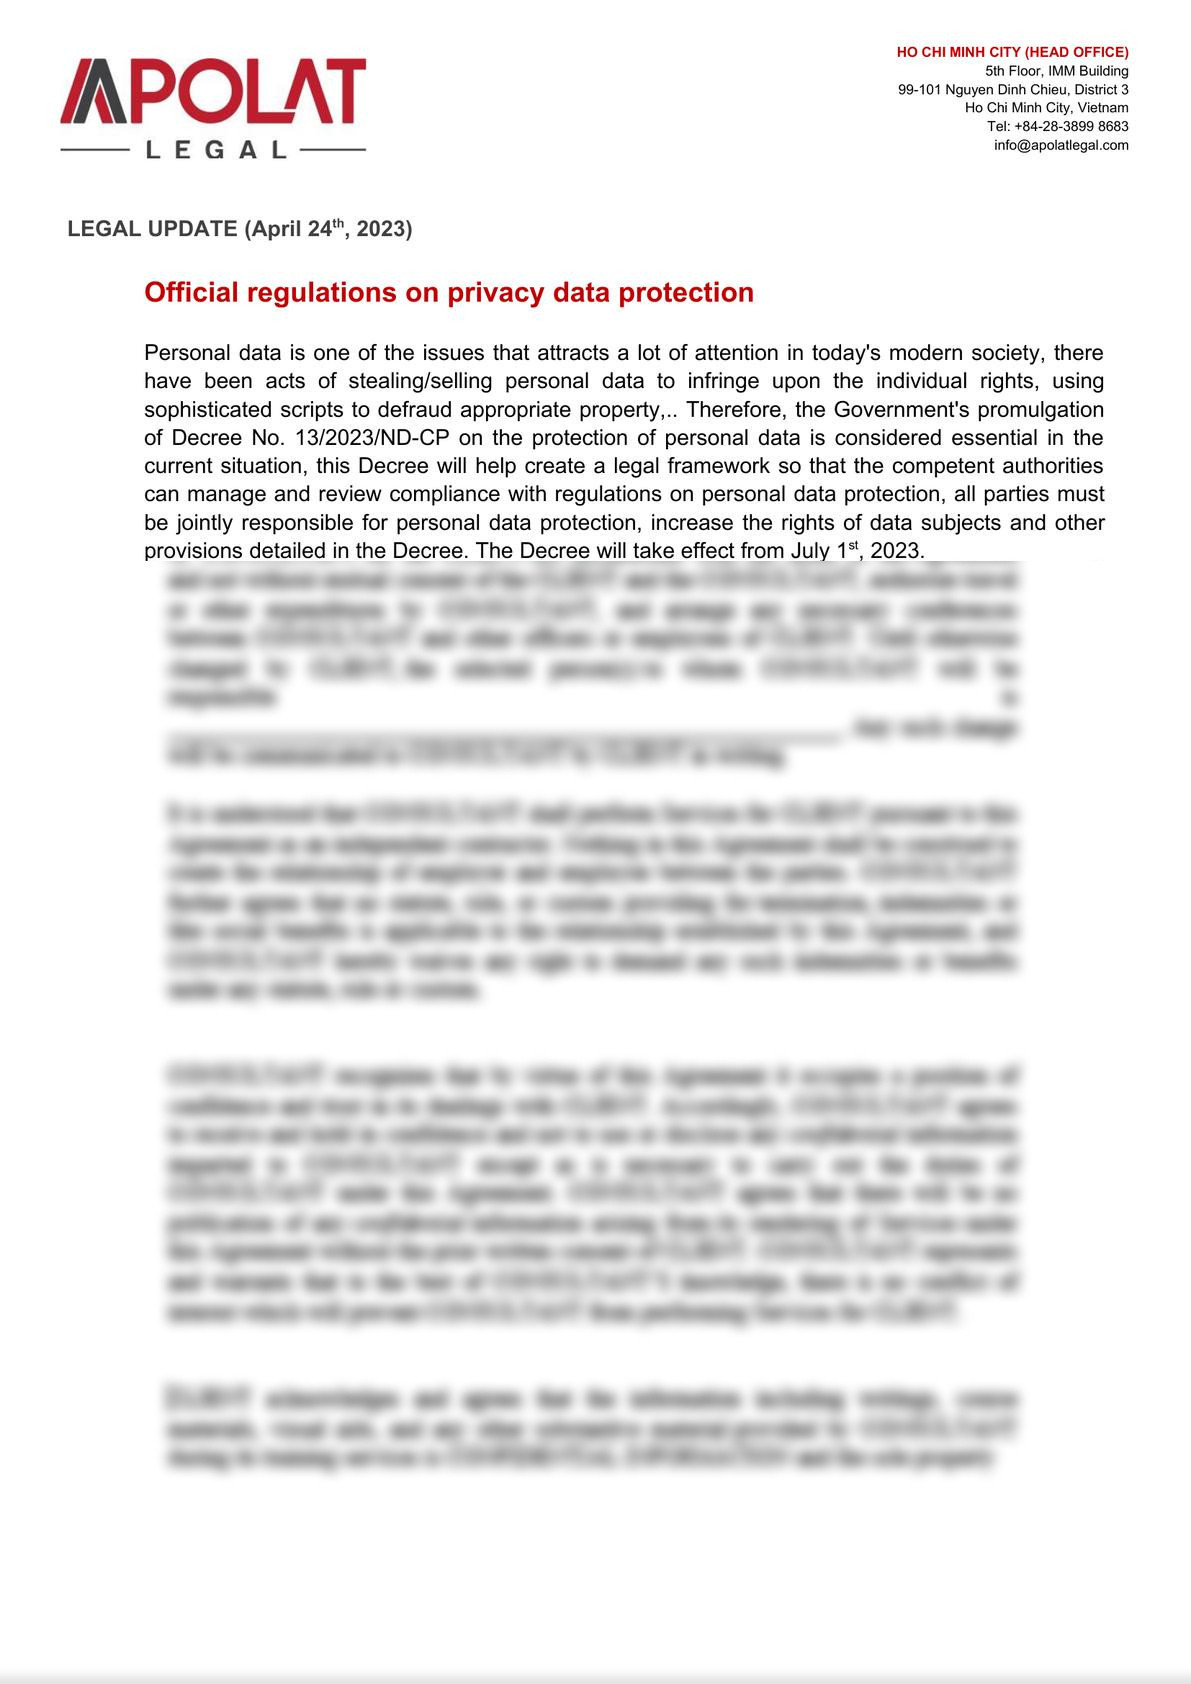 Legal Update_Official regulations on privacy data protection -0